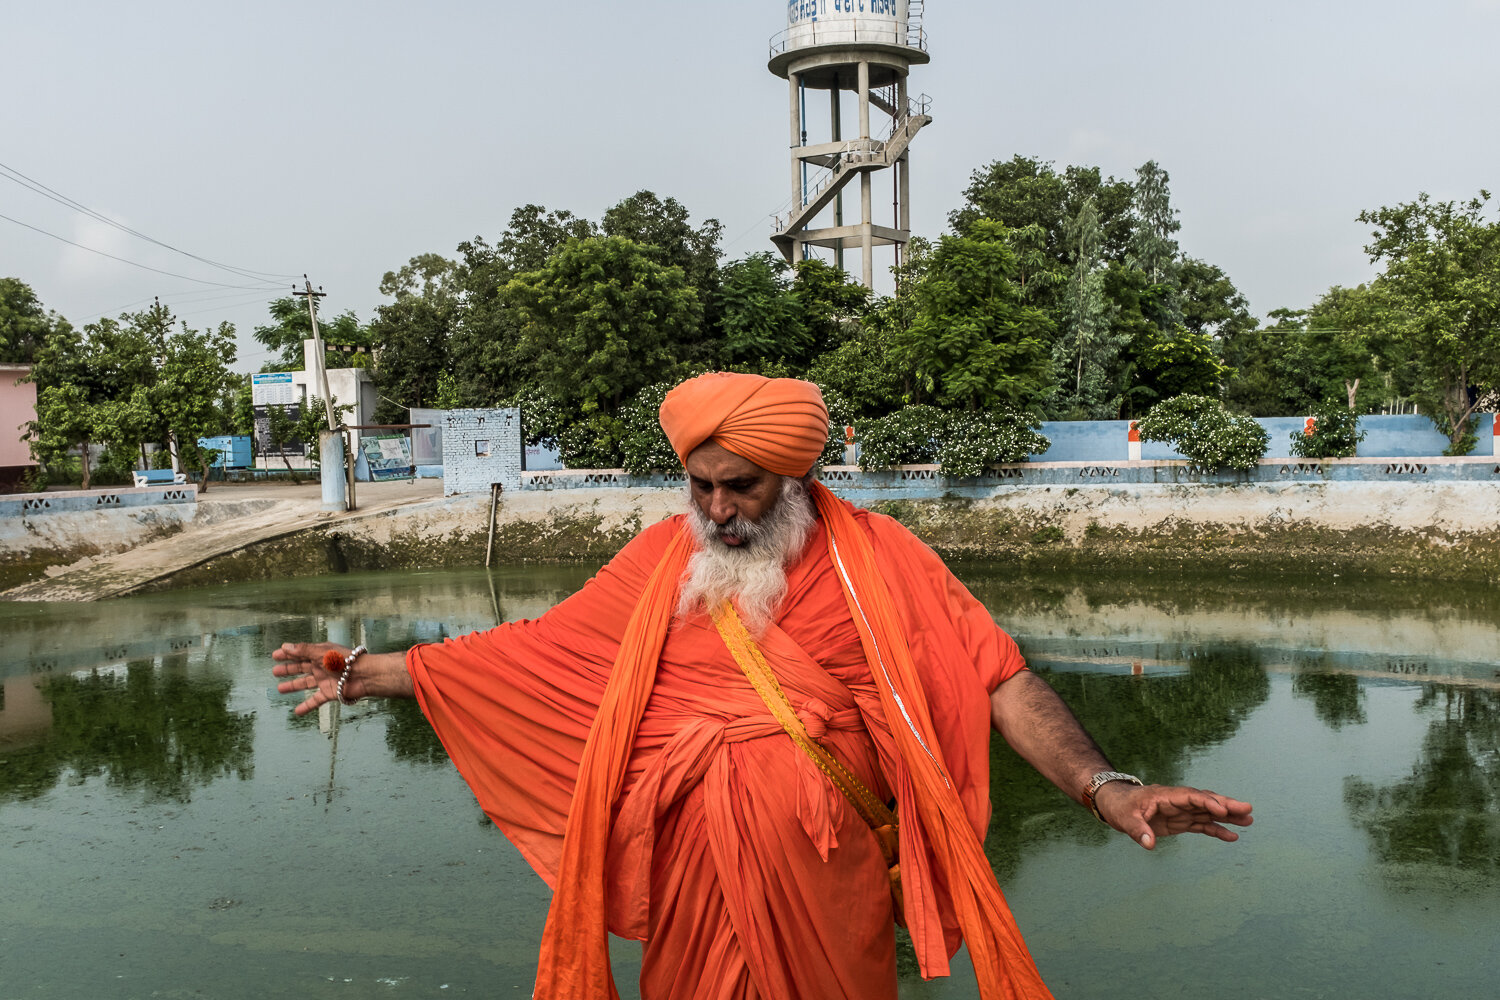  Sant Balbir Singh Seechewal, a Sikh guru, gives a tour of the local water treatment plant he created on Saturday, August 5, 2017 in Seechewal, Punjab, India. Baba Ji's method of treating polluted local waterways in order to purify the water and redi